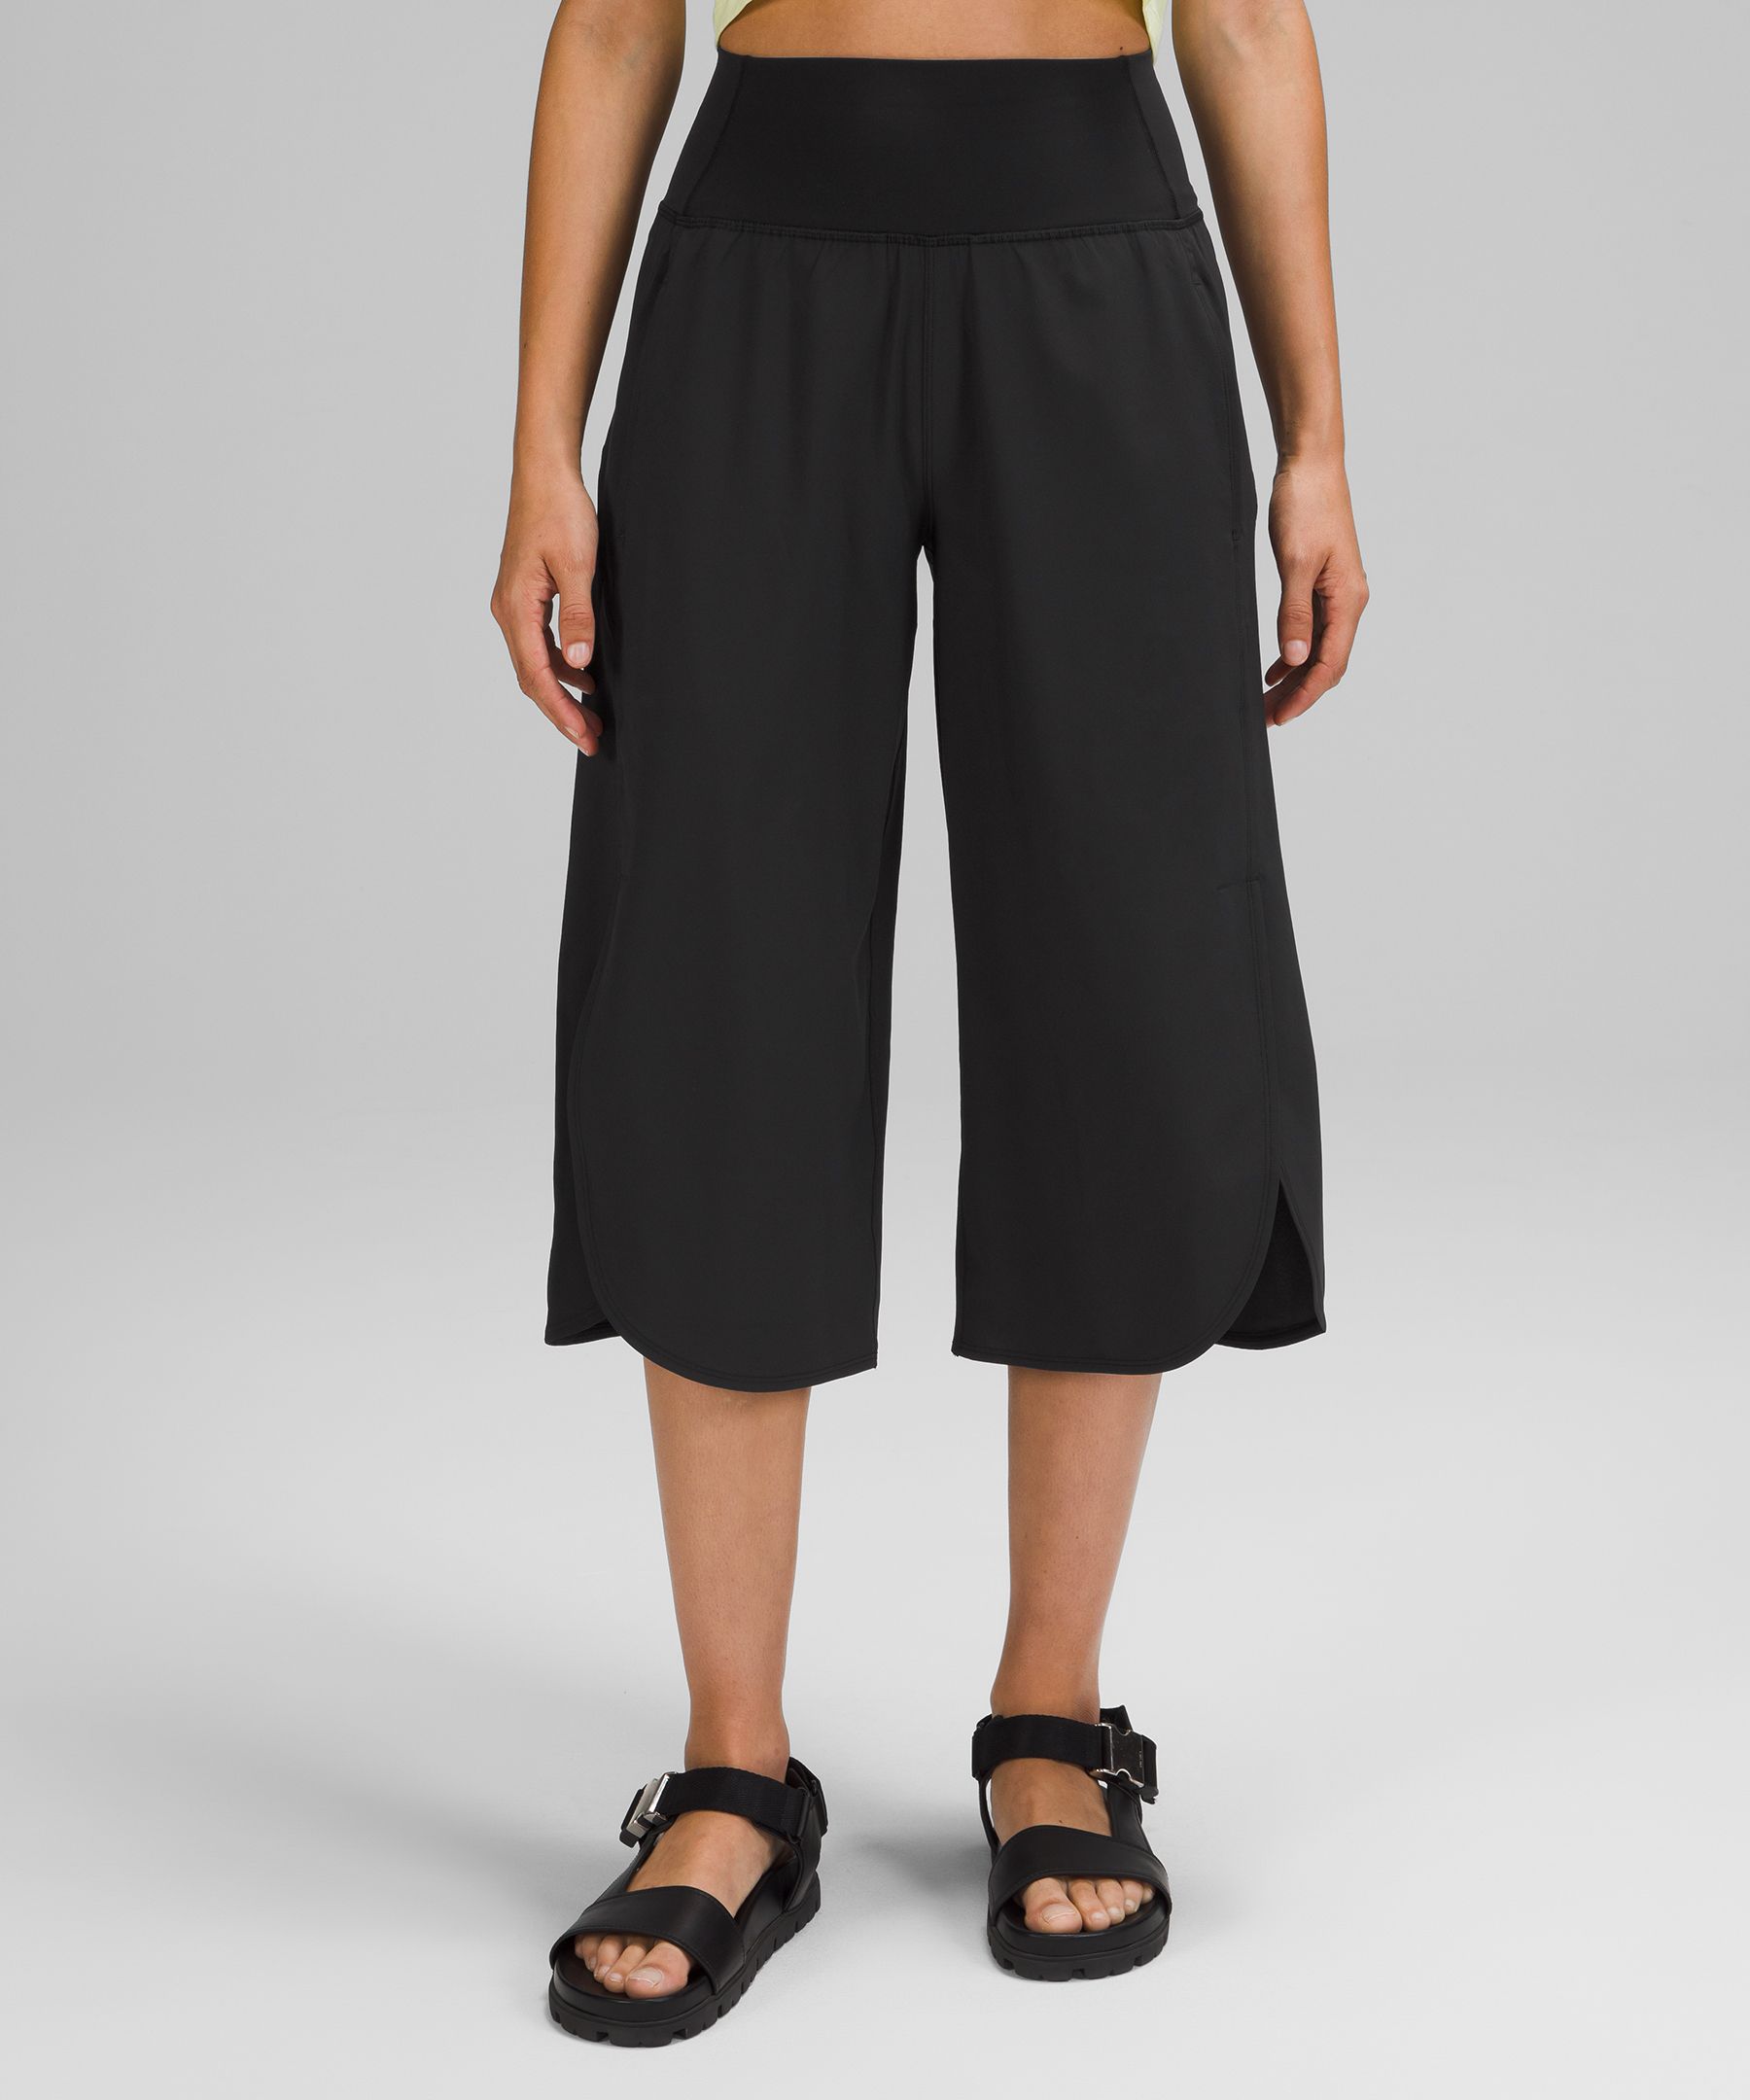 Can't get enough of these wide leg cropped pants from lululemon